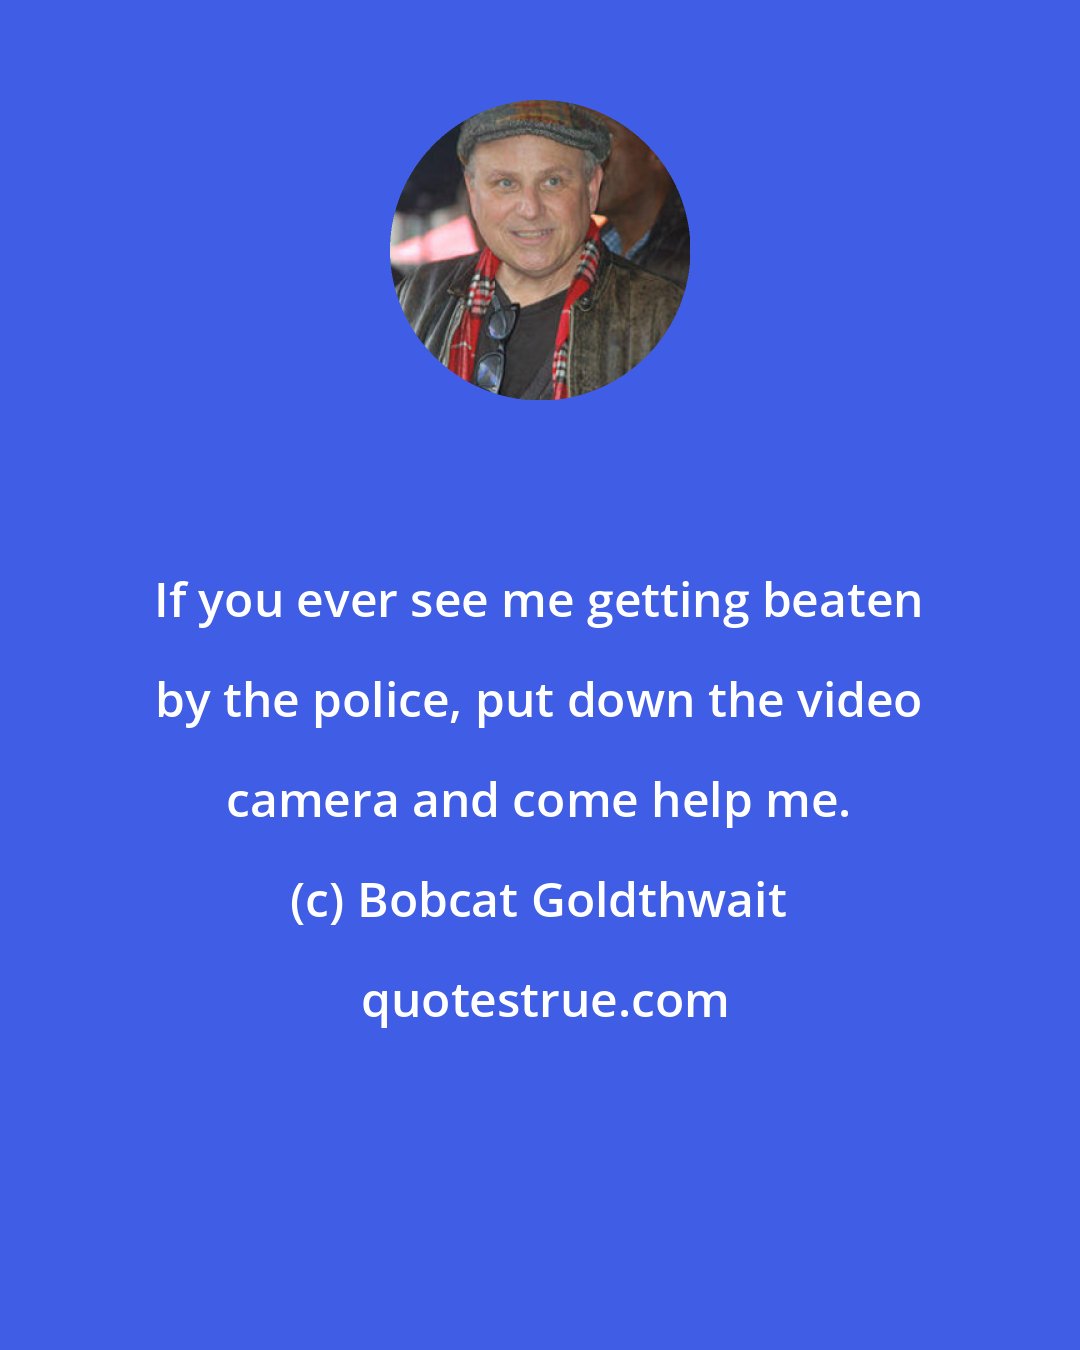 Bobcat Goldthwait: If you ever see me getting beaten by the police, put down the video camera and come help me.